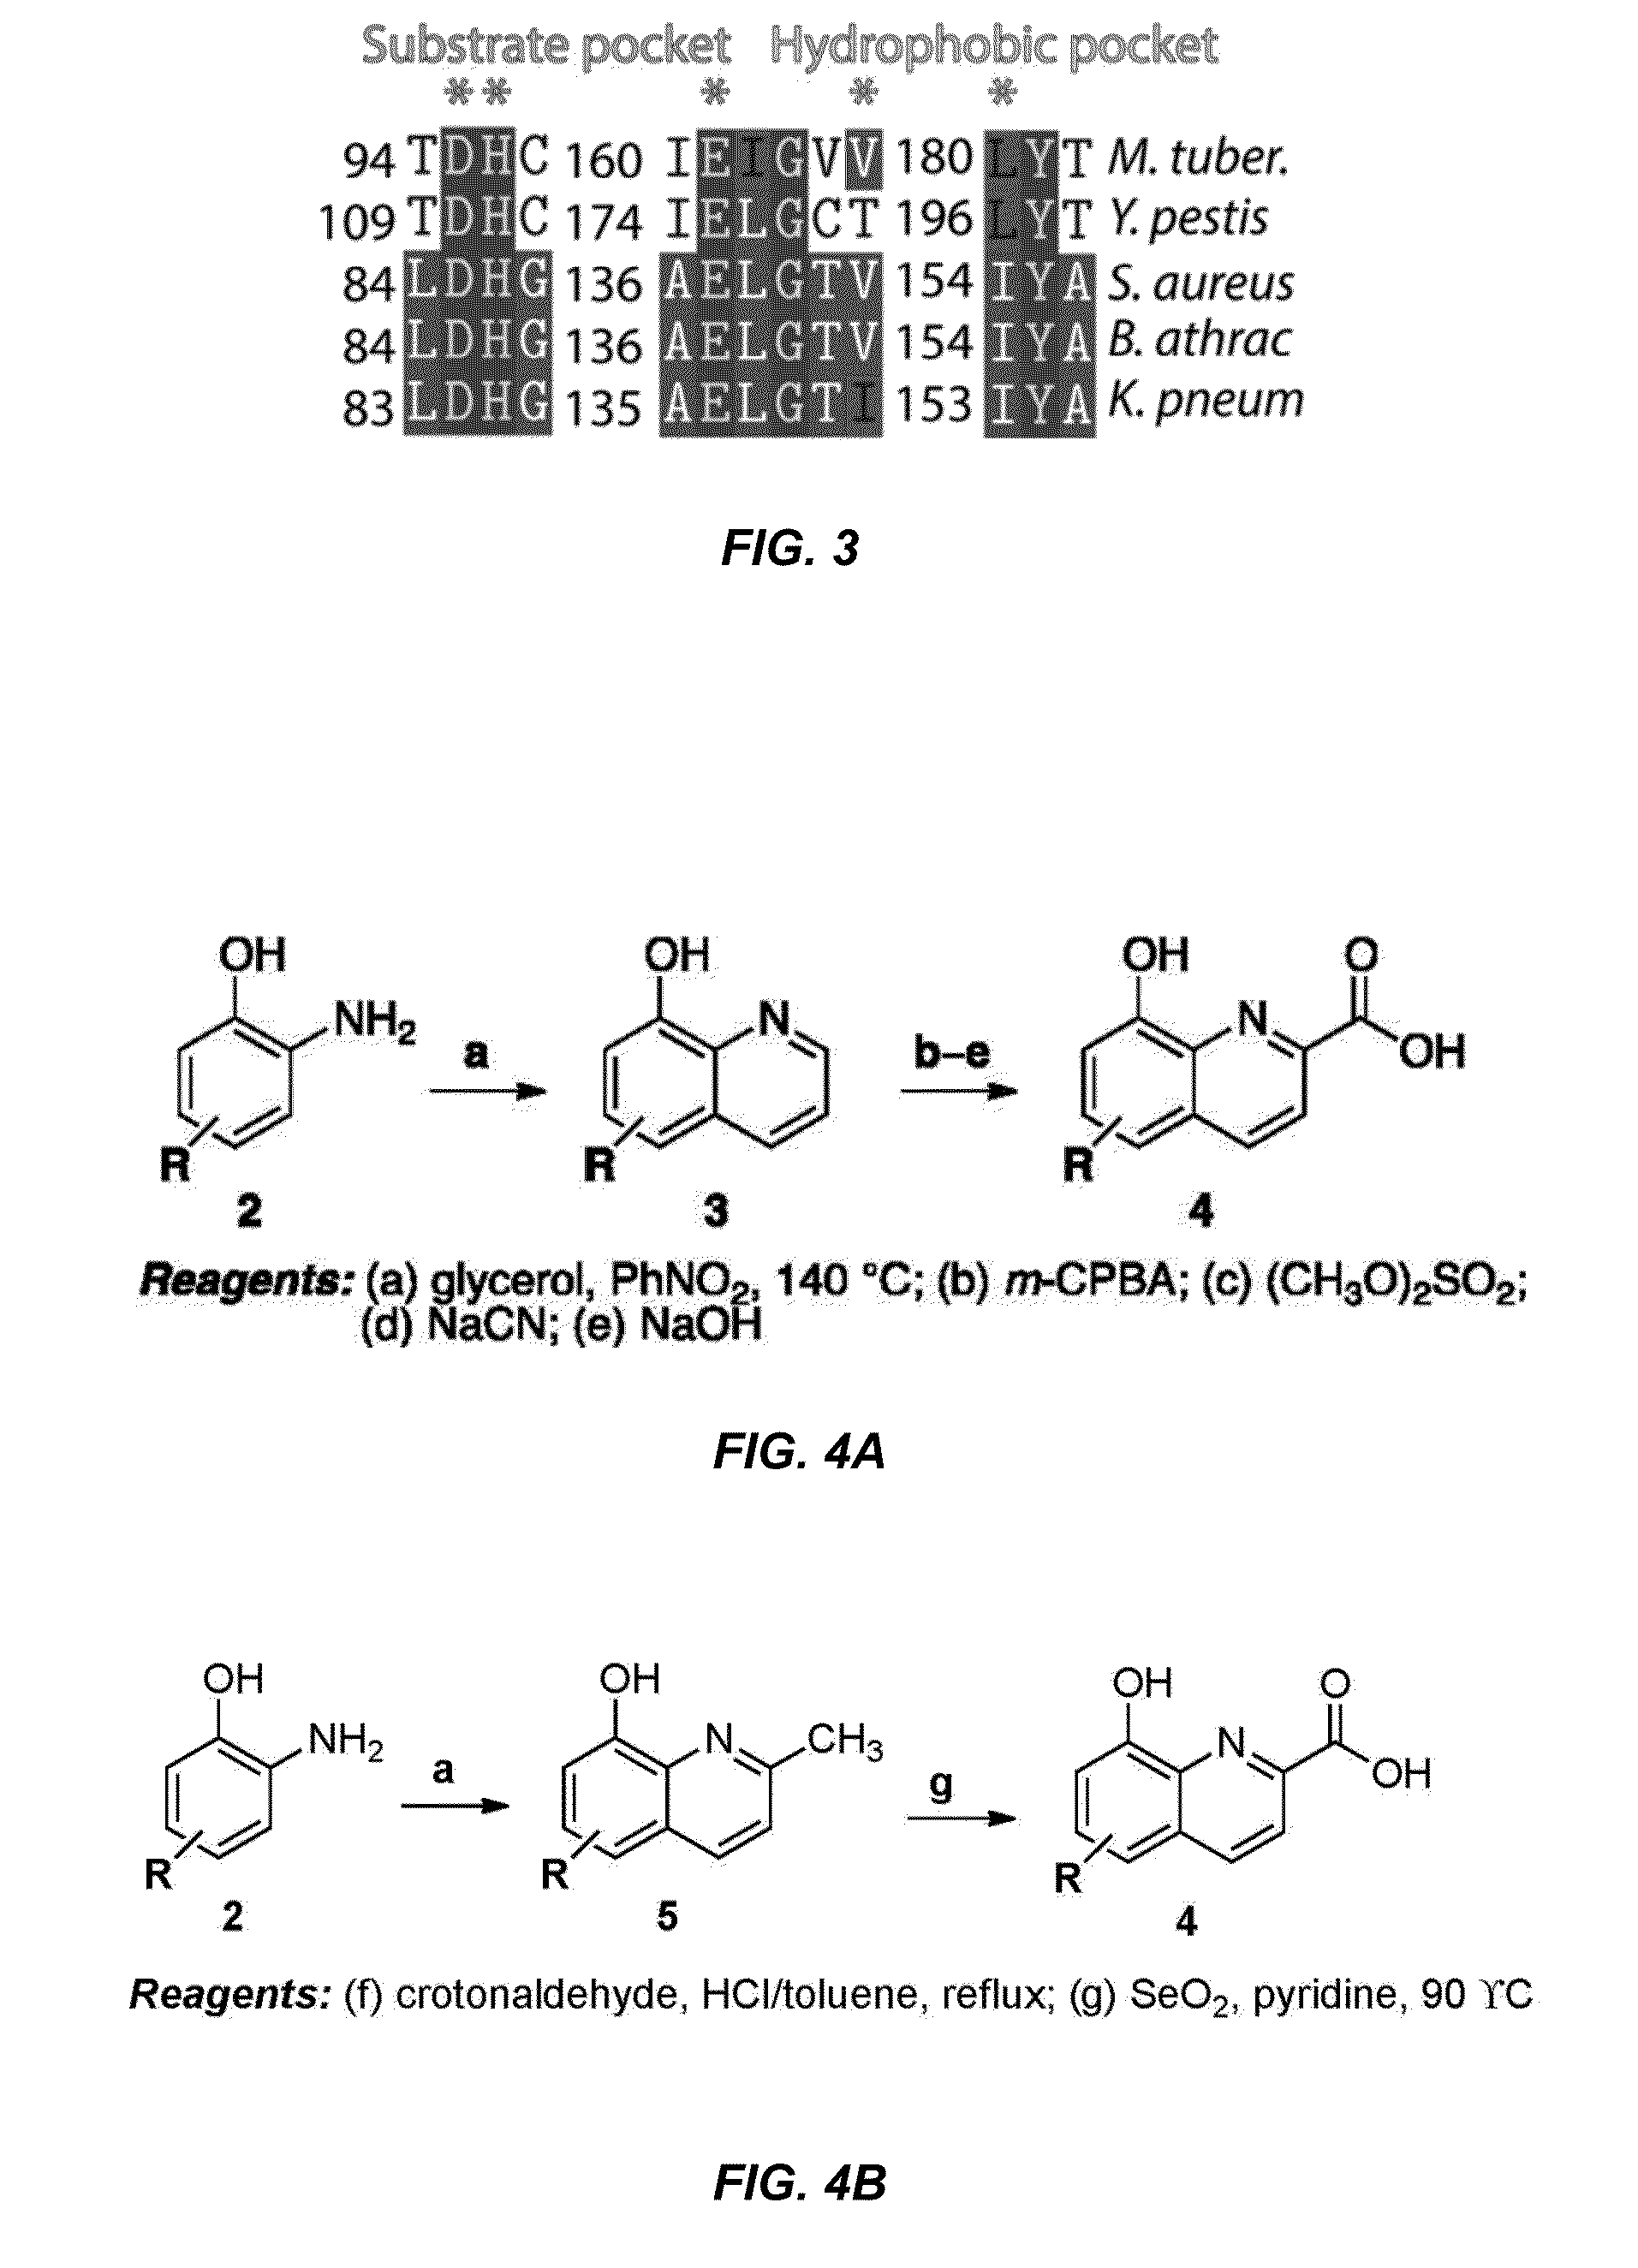 Antibiotic and anti-parasitic agents that modulate class II fructose 1,6-bisphosphate aldolase